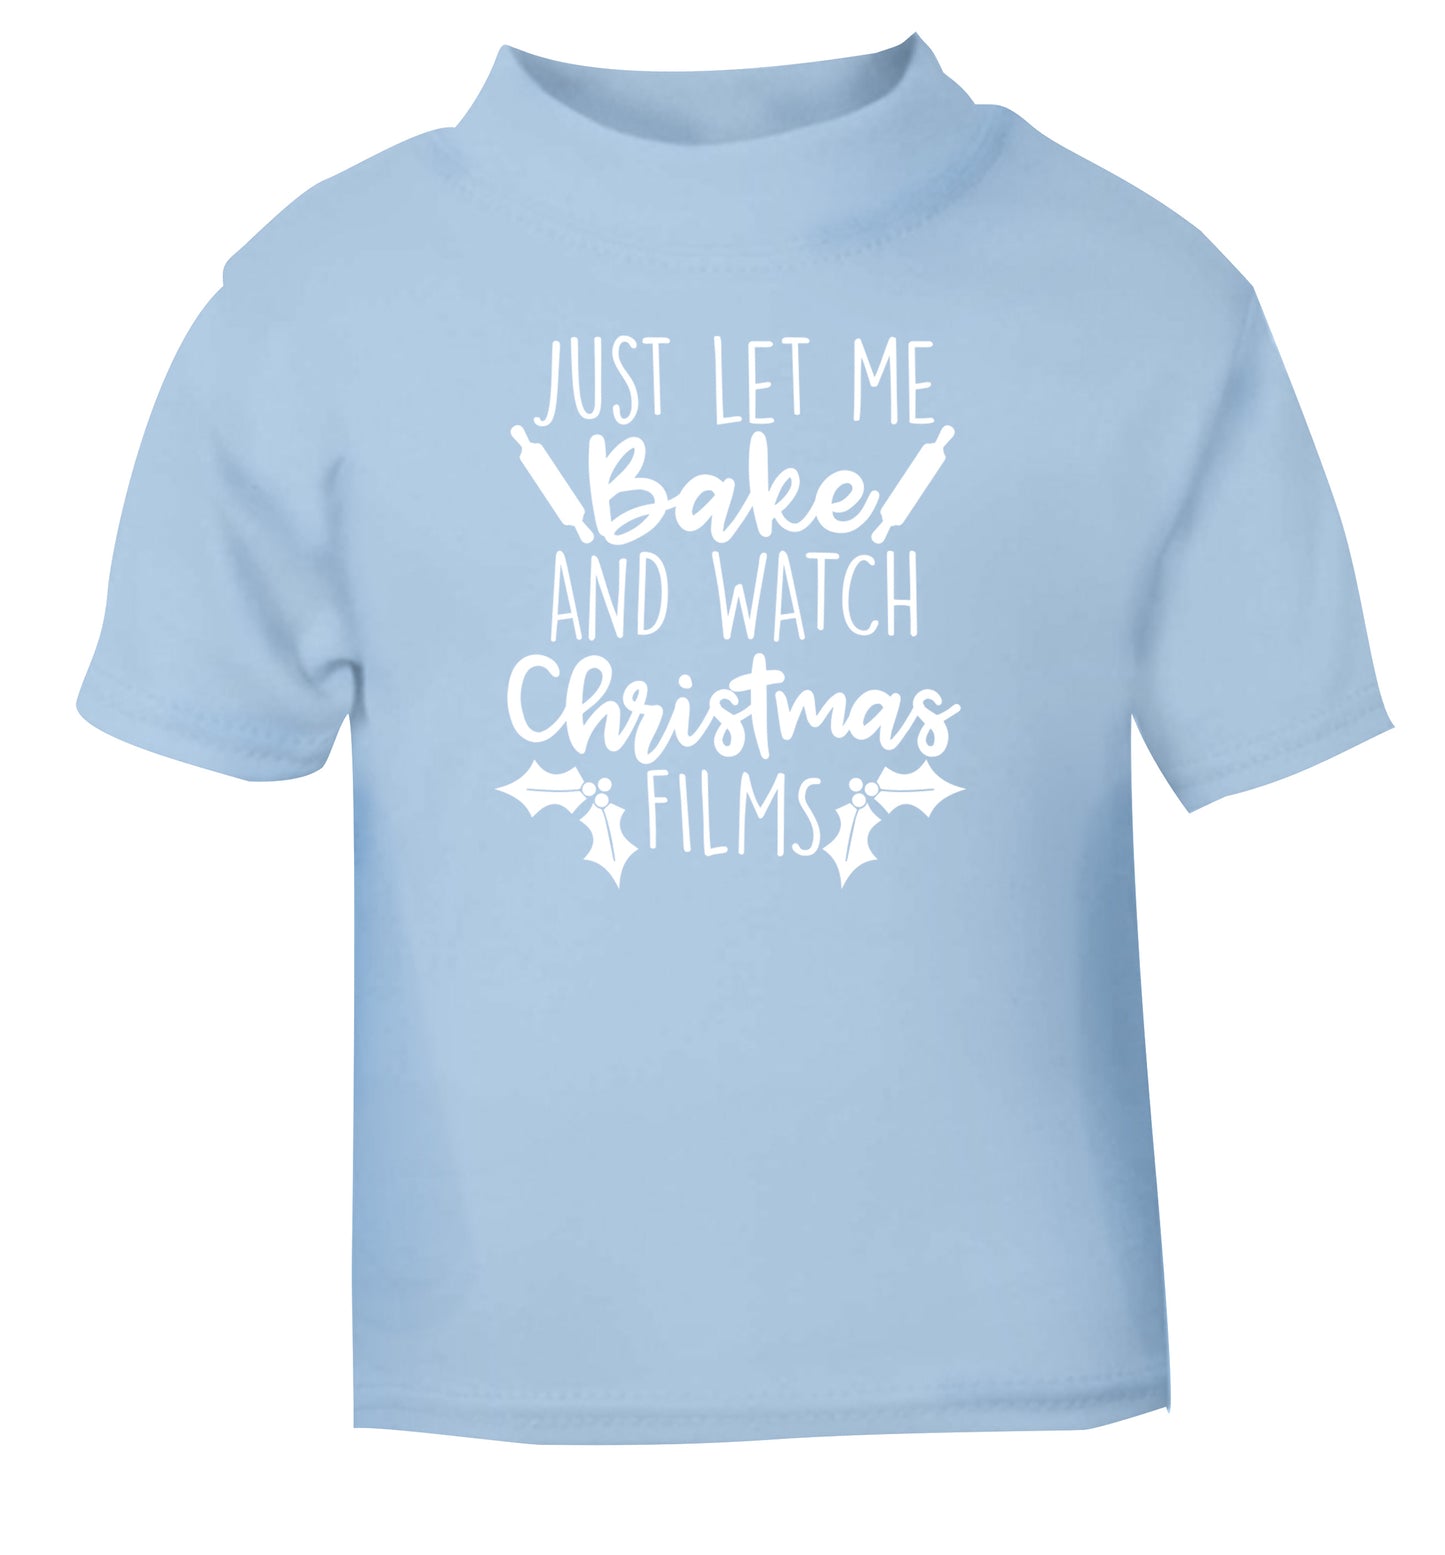 Just let me bake and watch Christmas films light blue Baby Toddler Tshirt 2 Years